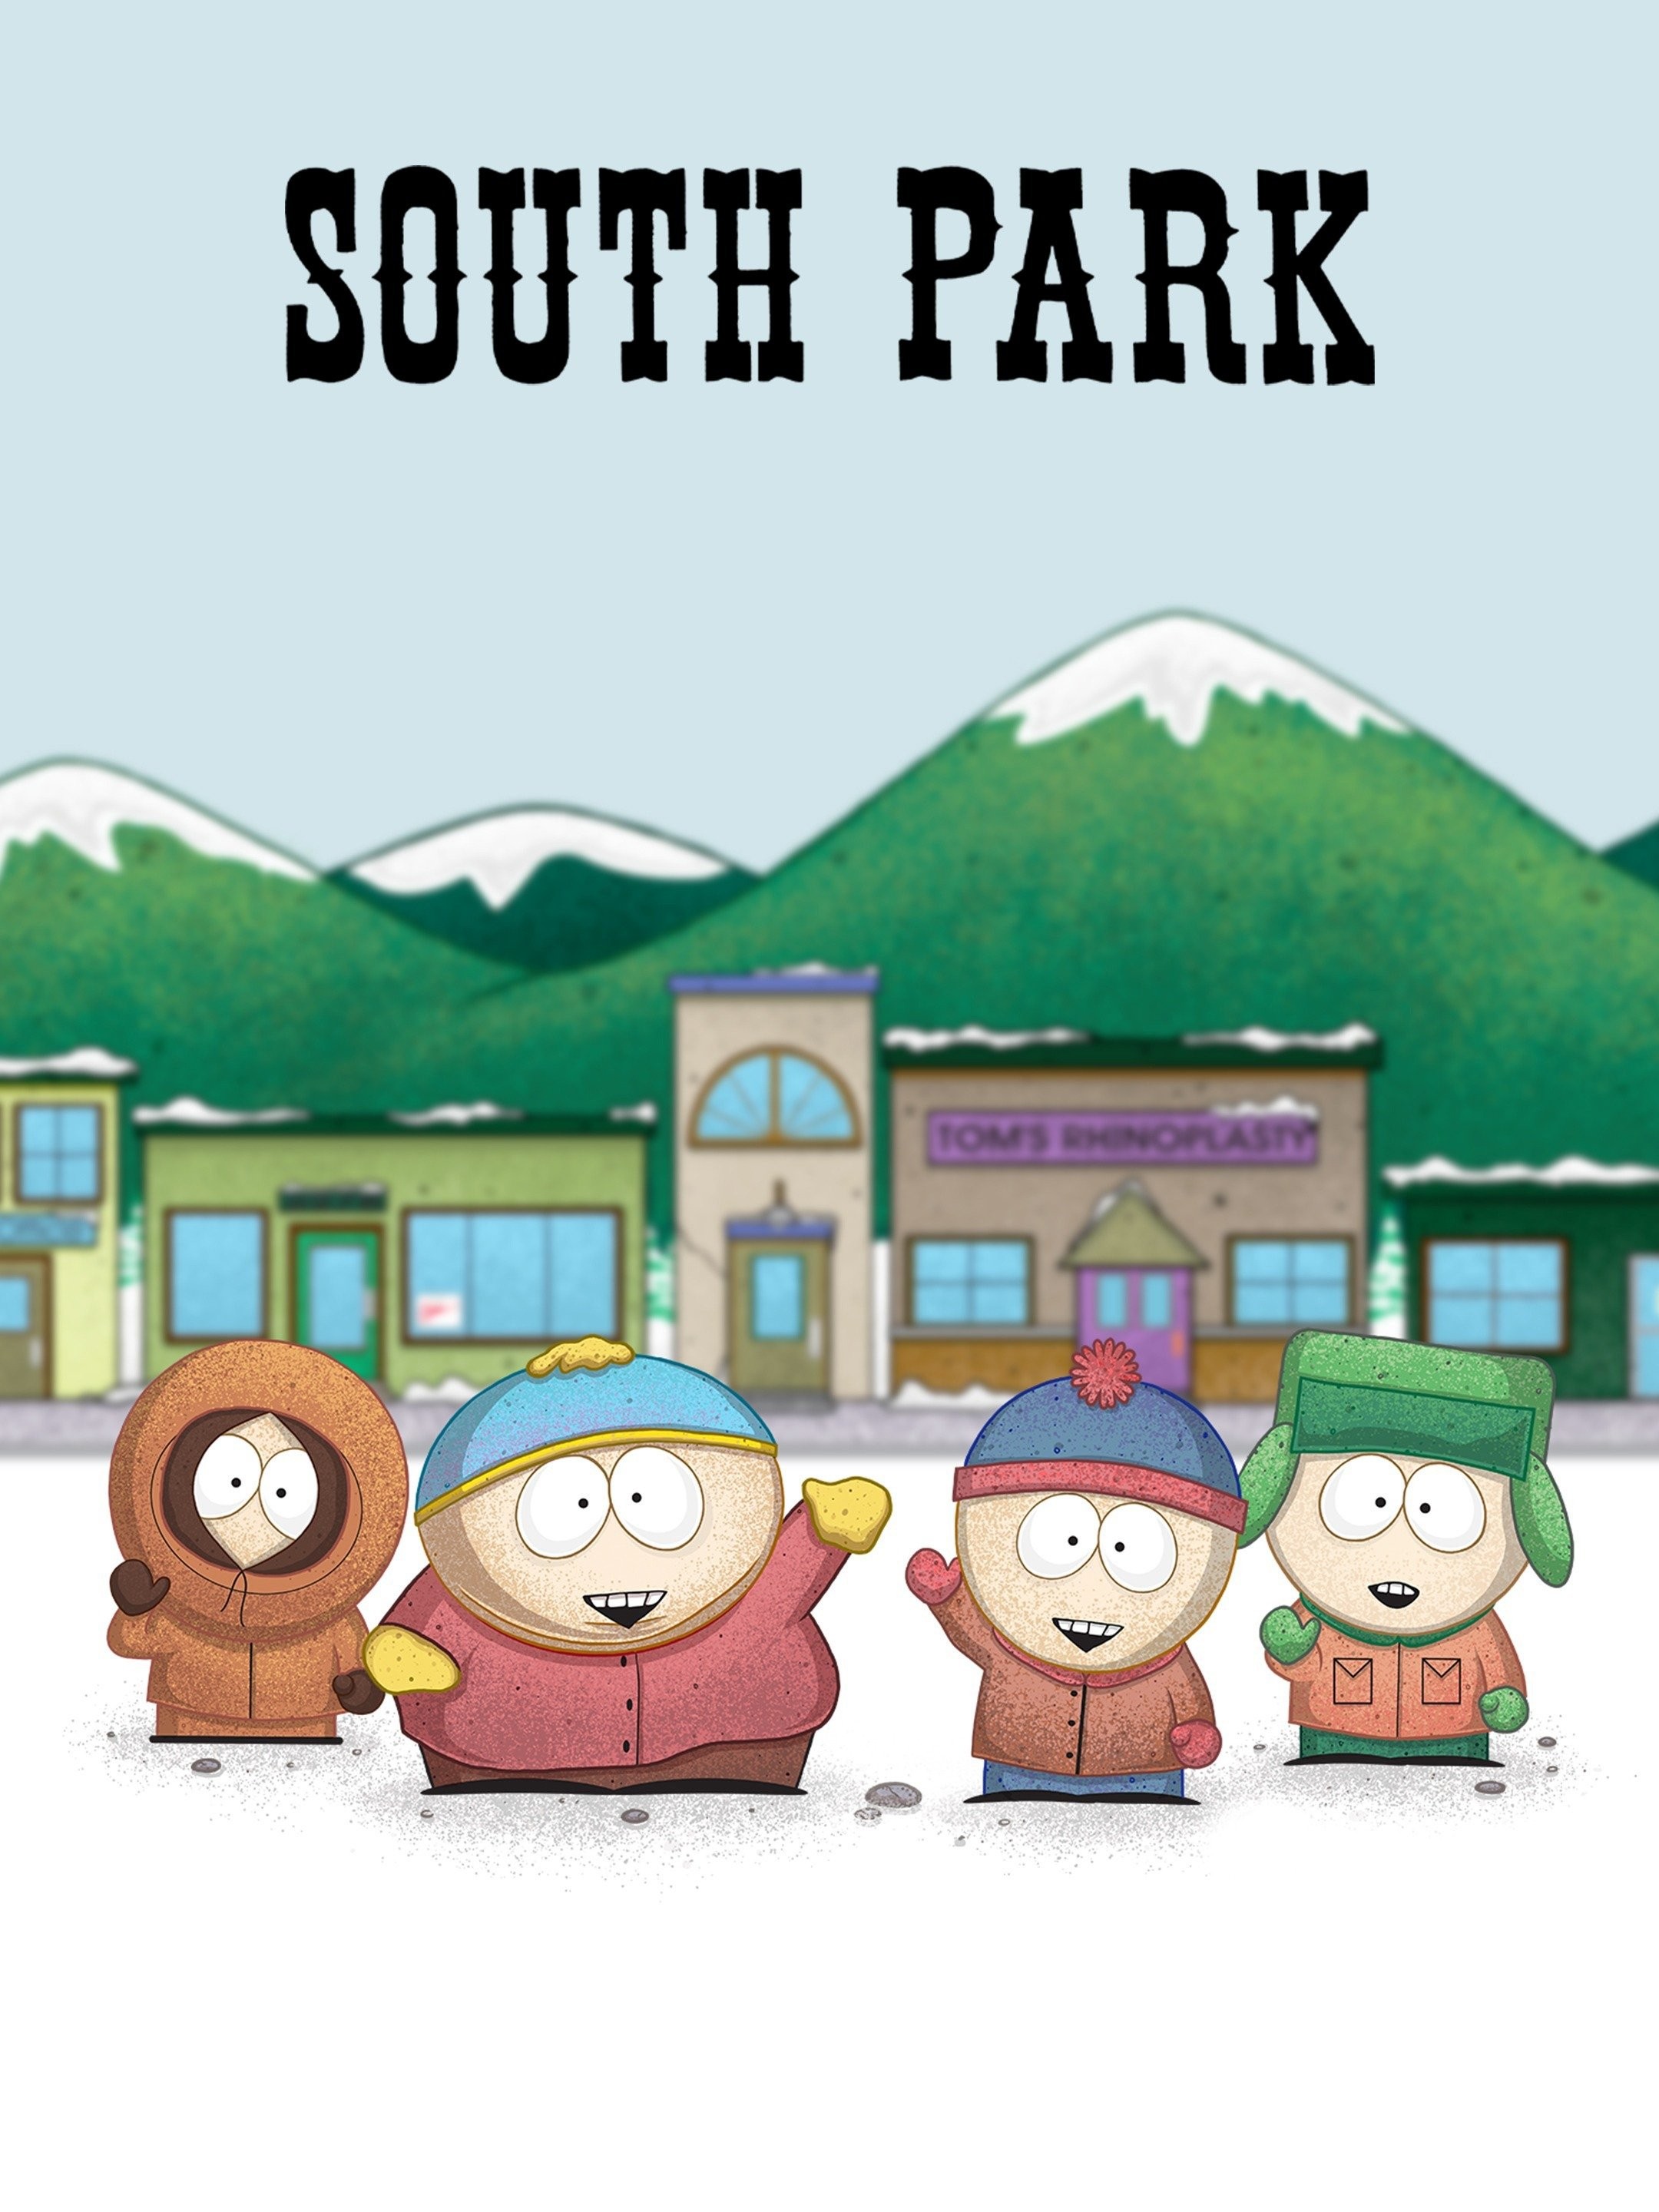 SouthPark Shopping Guide